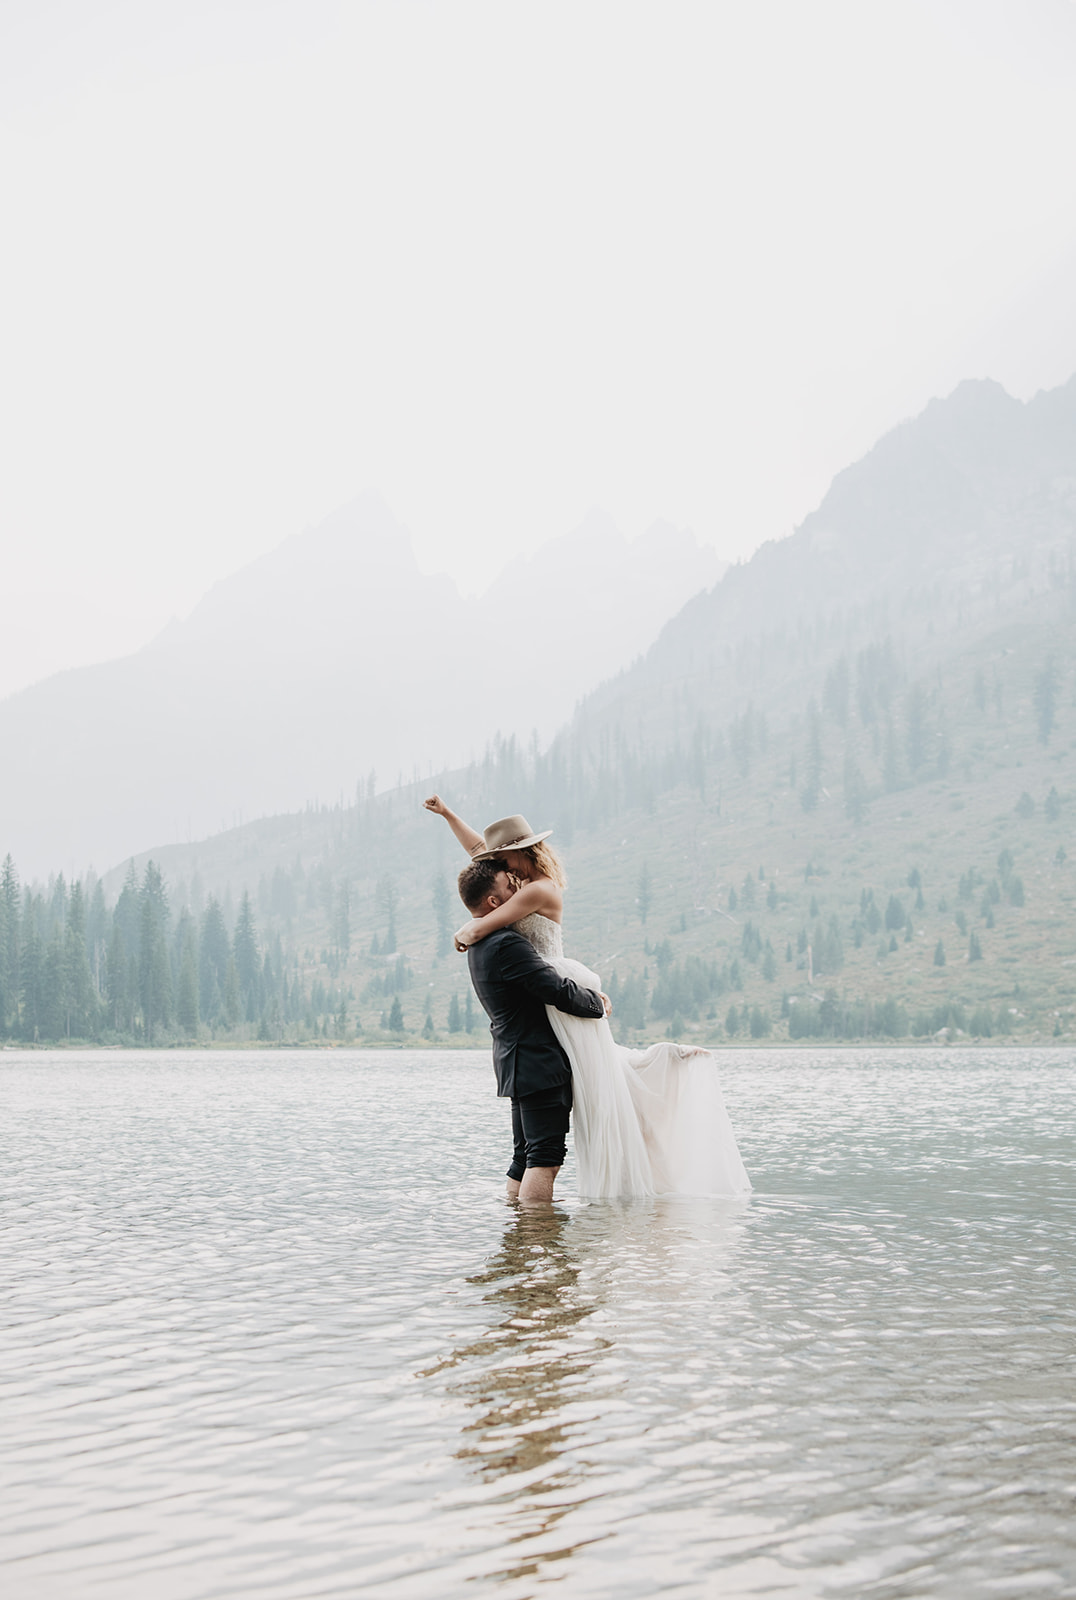 bride and groom stannding in String Lake in the Tetons together as the grom who is in a black suit lifts his bride up in the air and the bride whois in a lace and tulle wedding dress kicks up her foot behind her and throws her fist into the air in victory